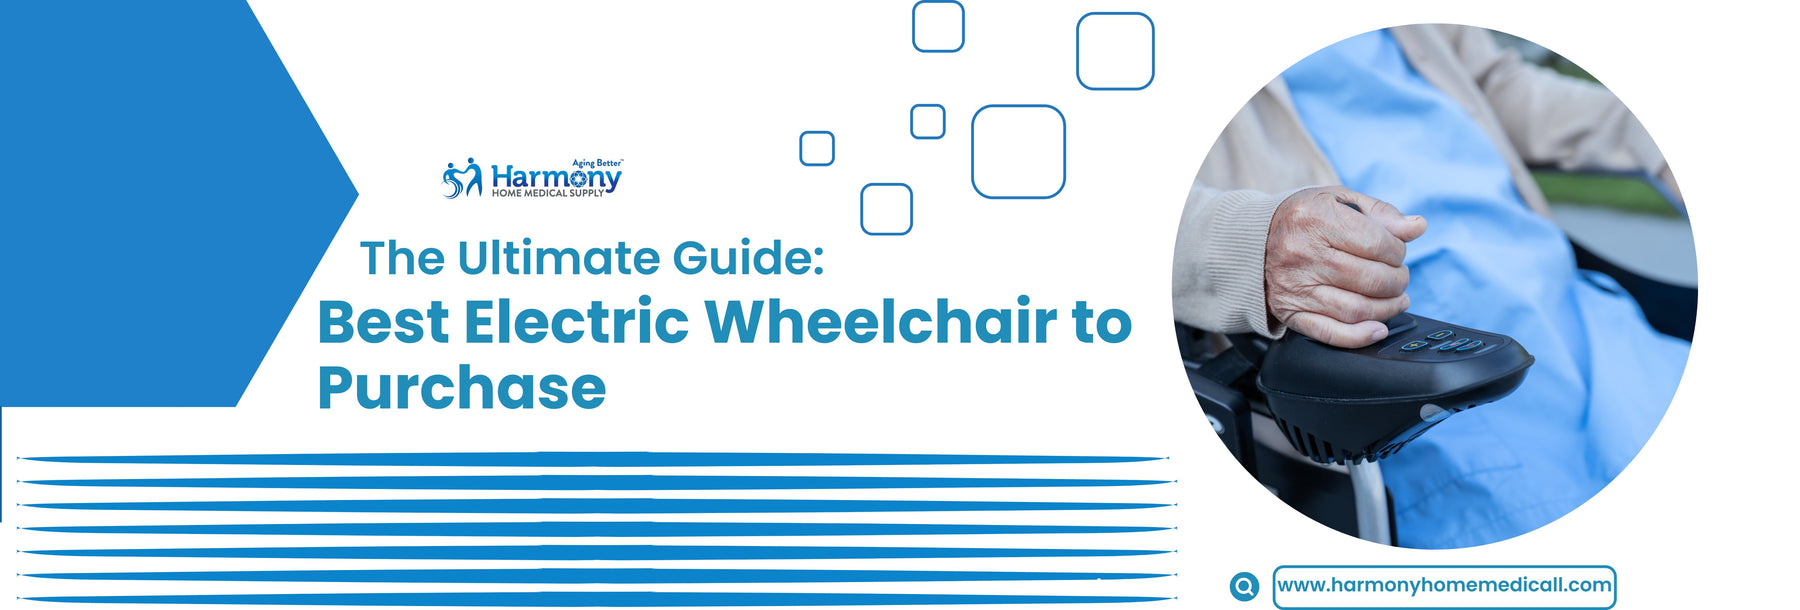 What is the Best Electric Wheelchair to Purchase?| The Ultimate Buying Guide - Harmony Home Medical Supply